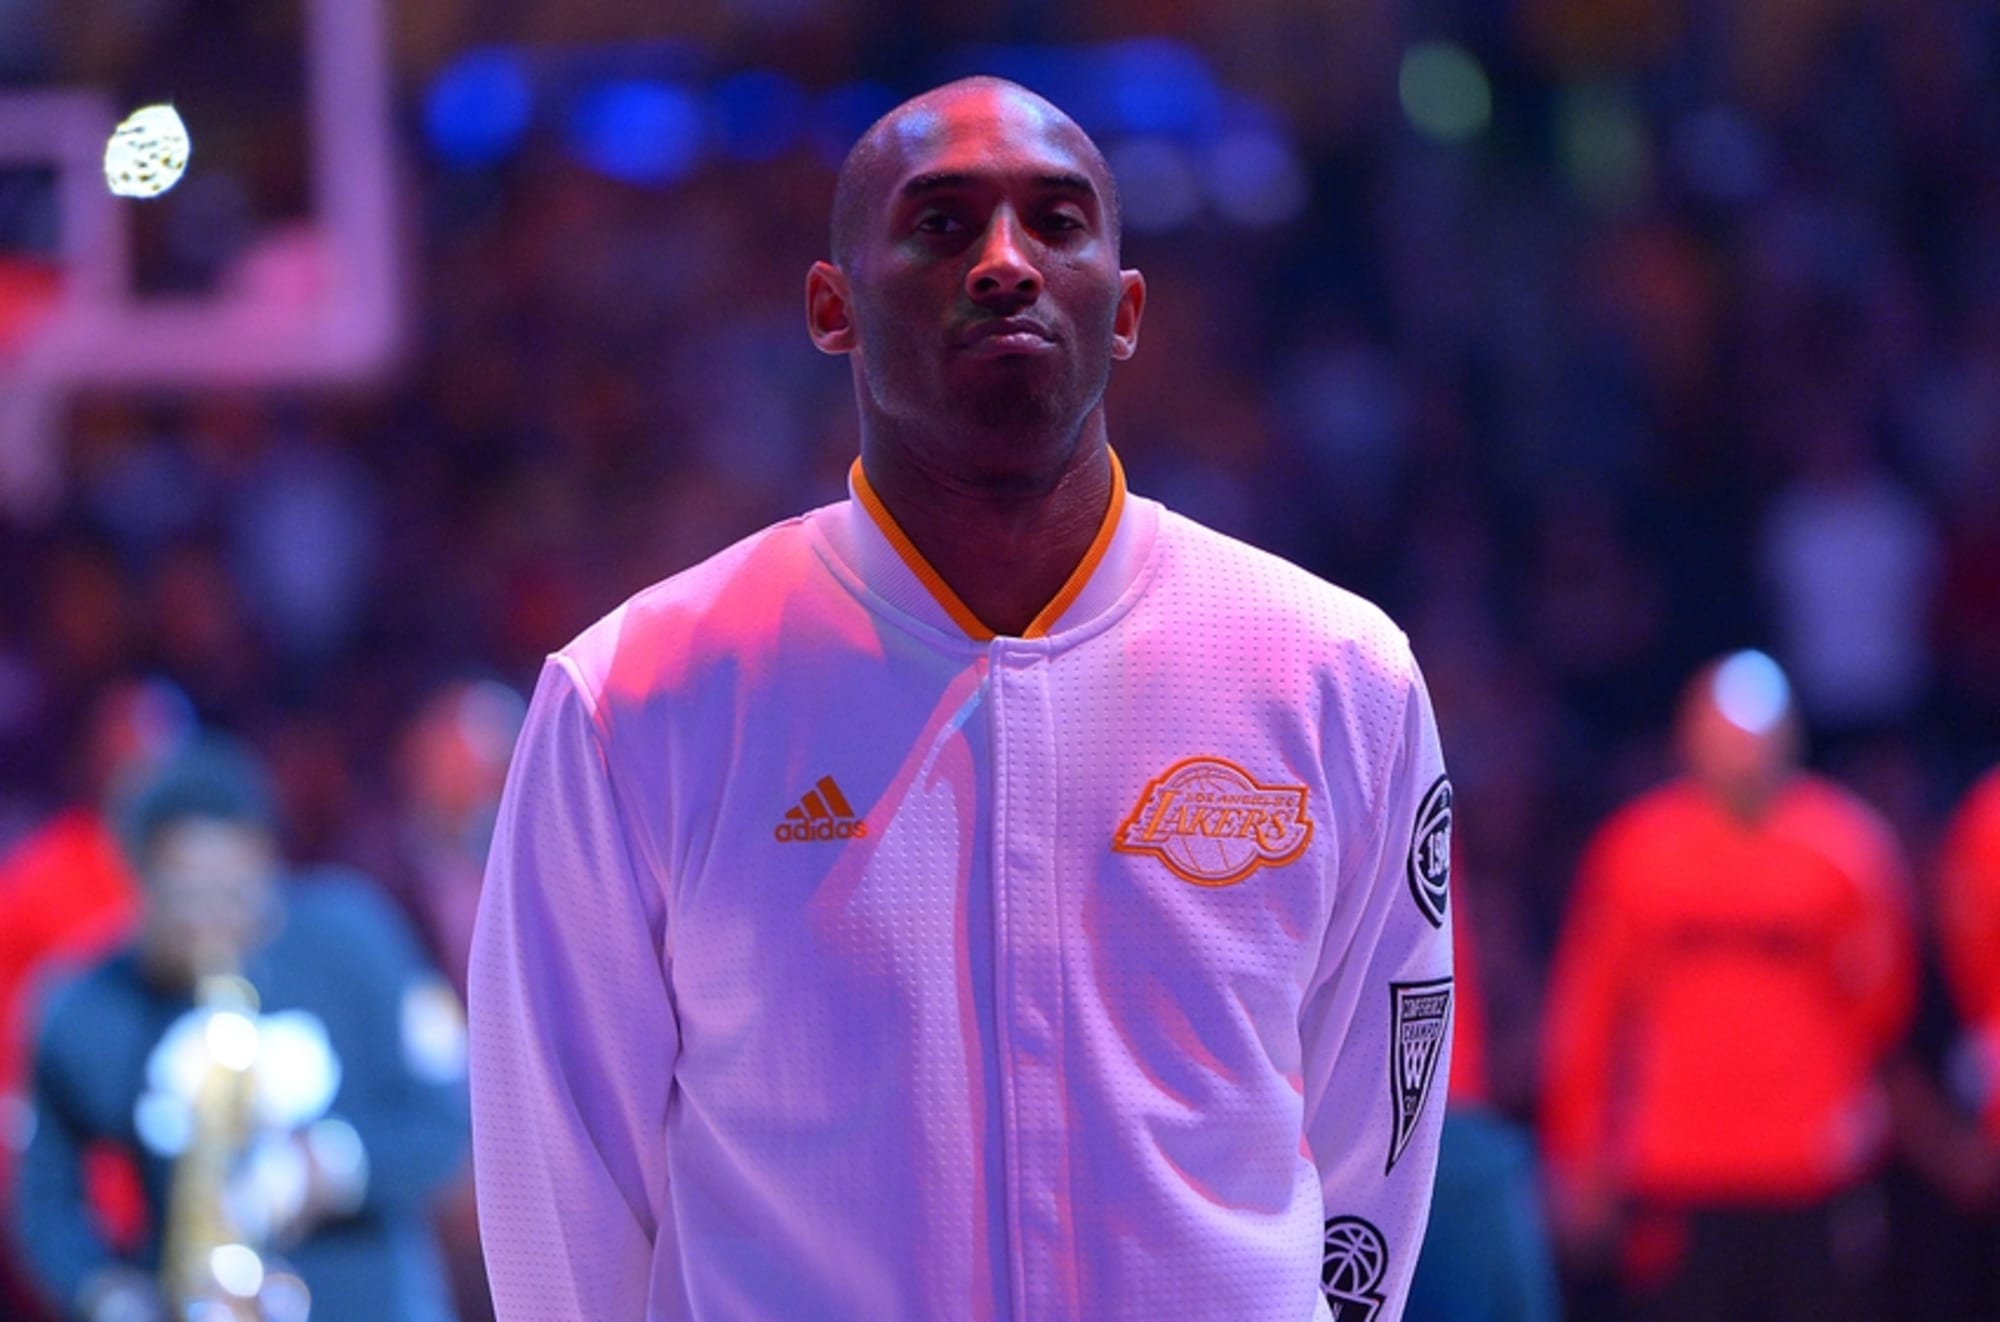 8? 24? Lakers will retire both of Kobe Bryant's jersey numbers in